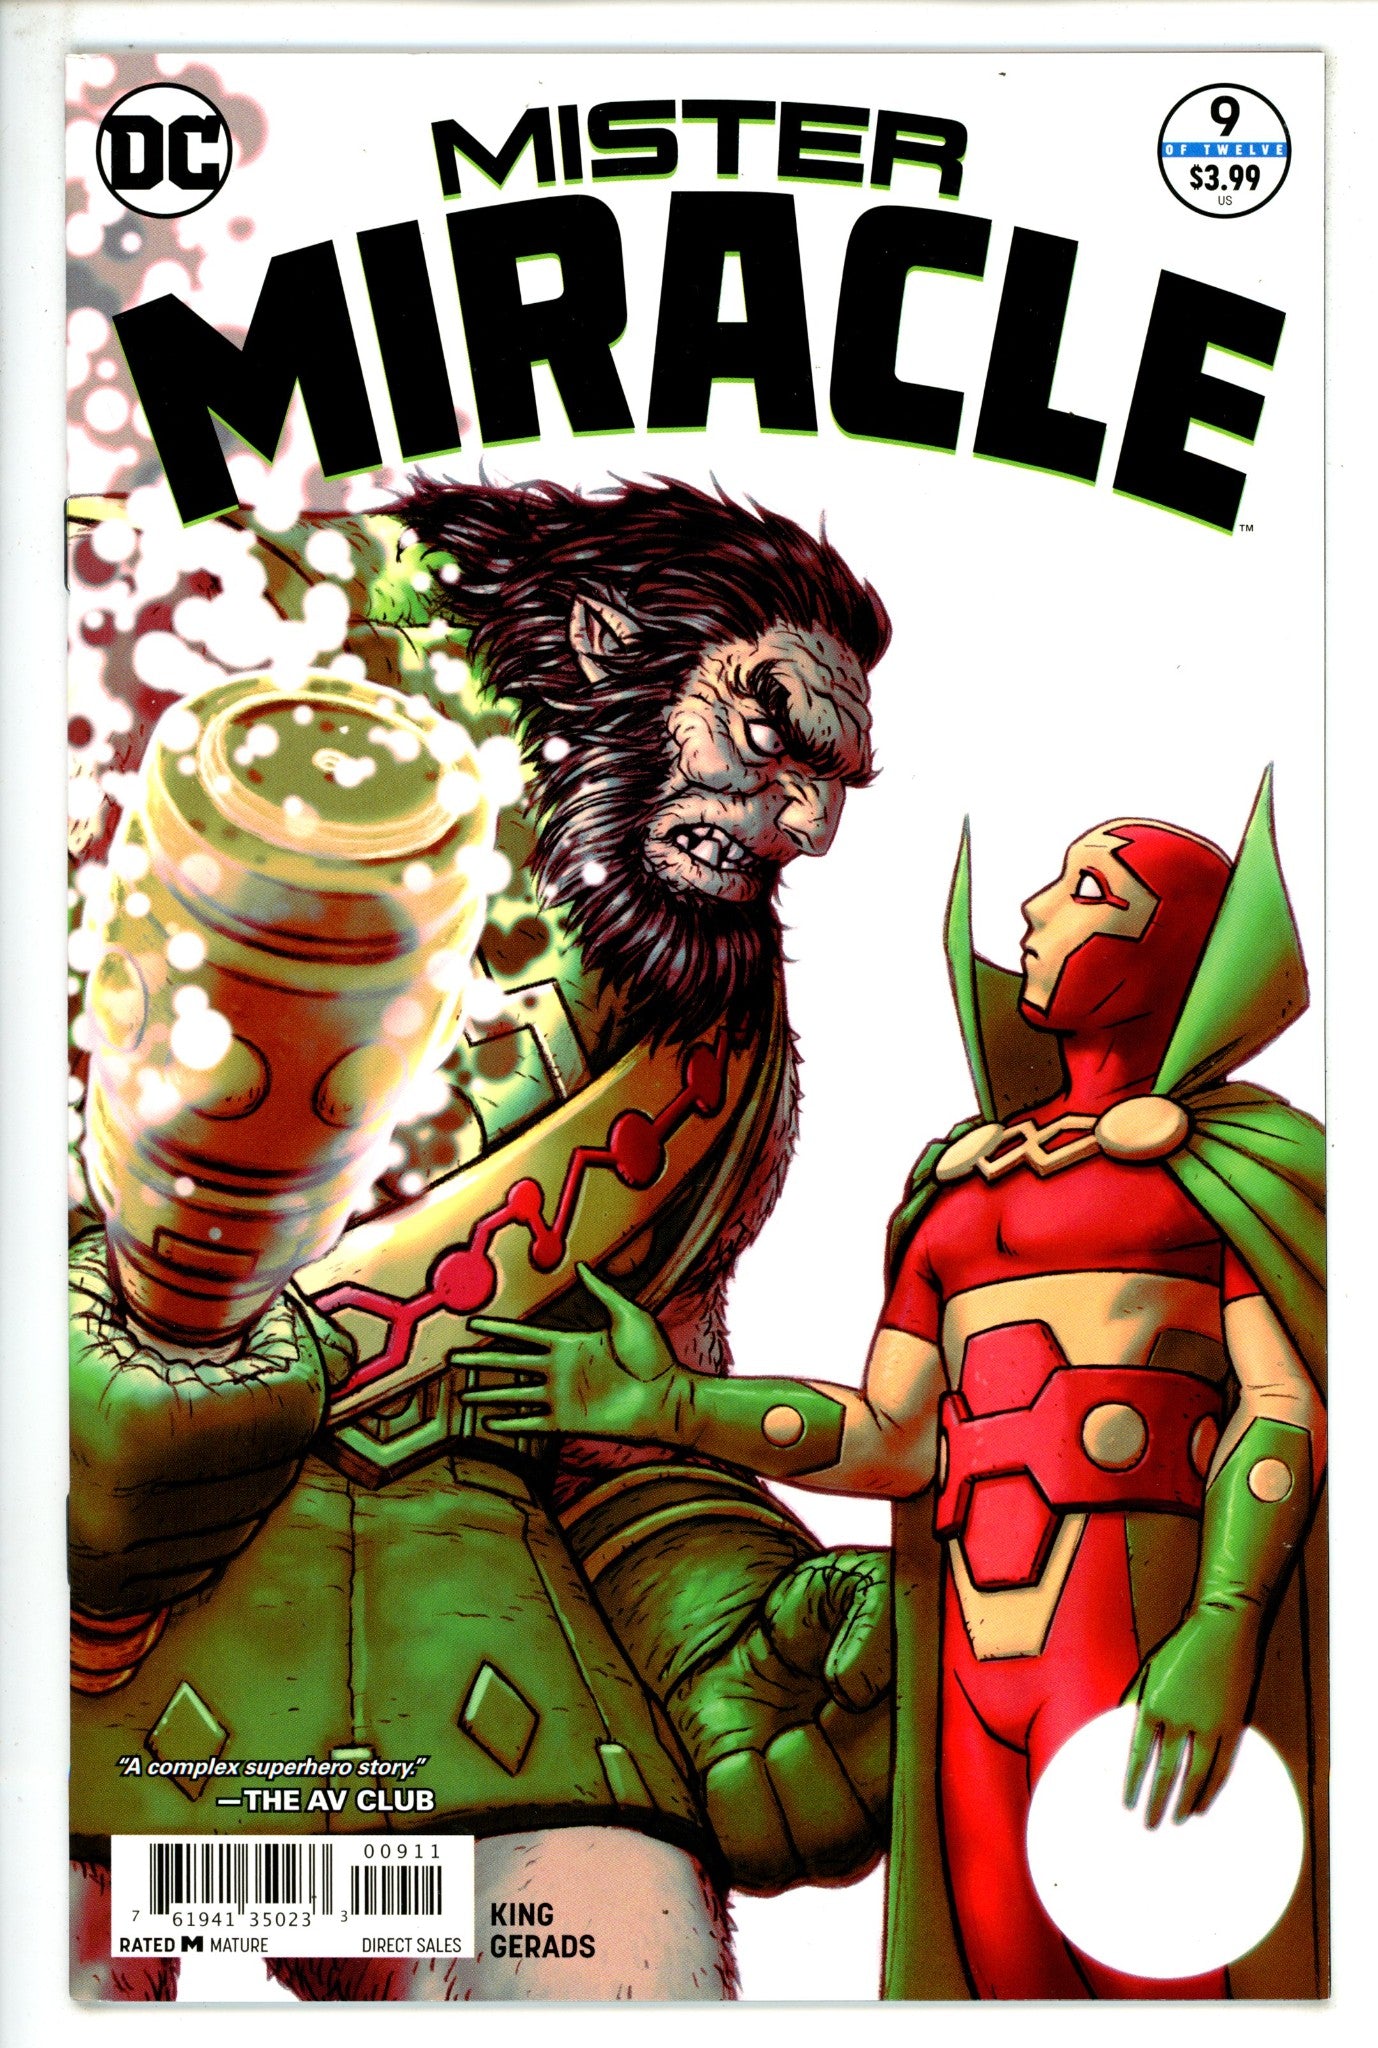 Mister Miracle Vol 4 9 High Grade (2018) 